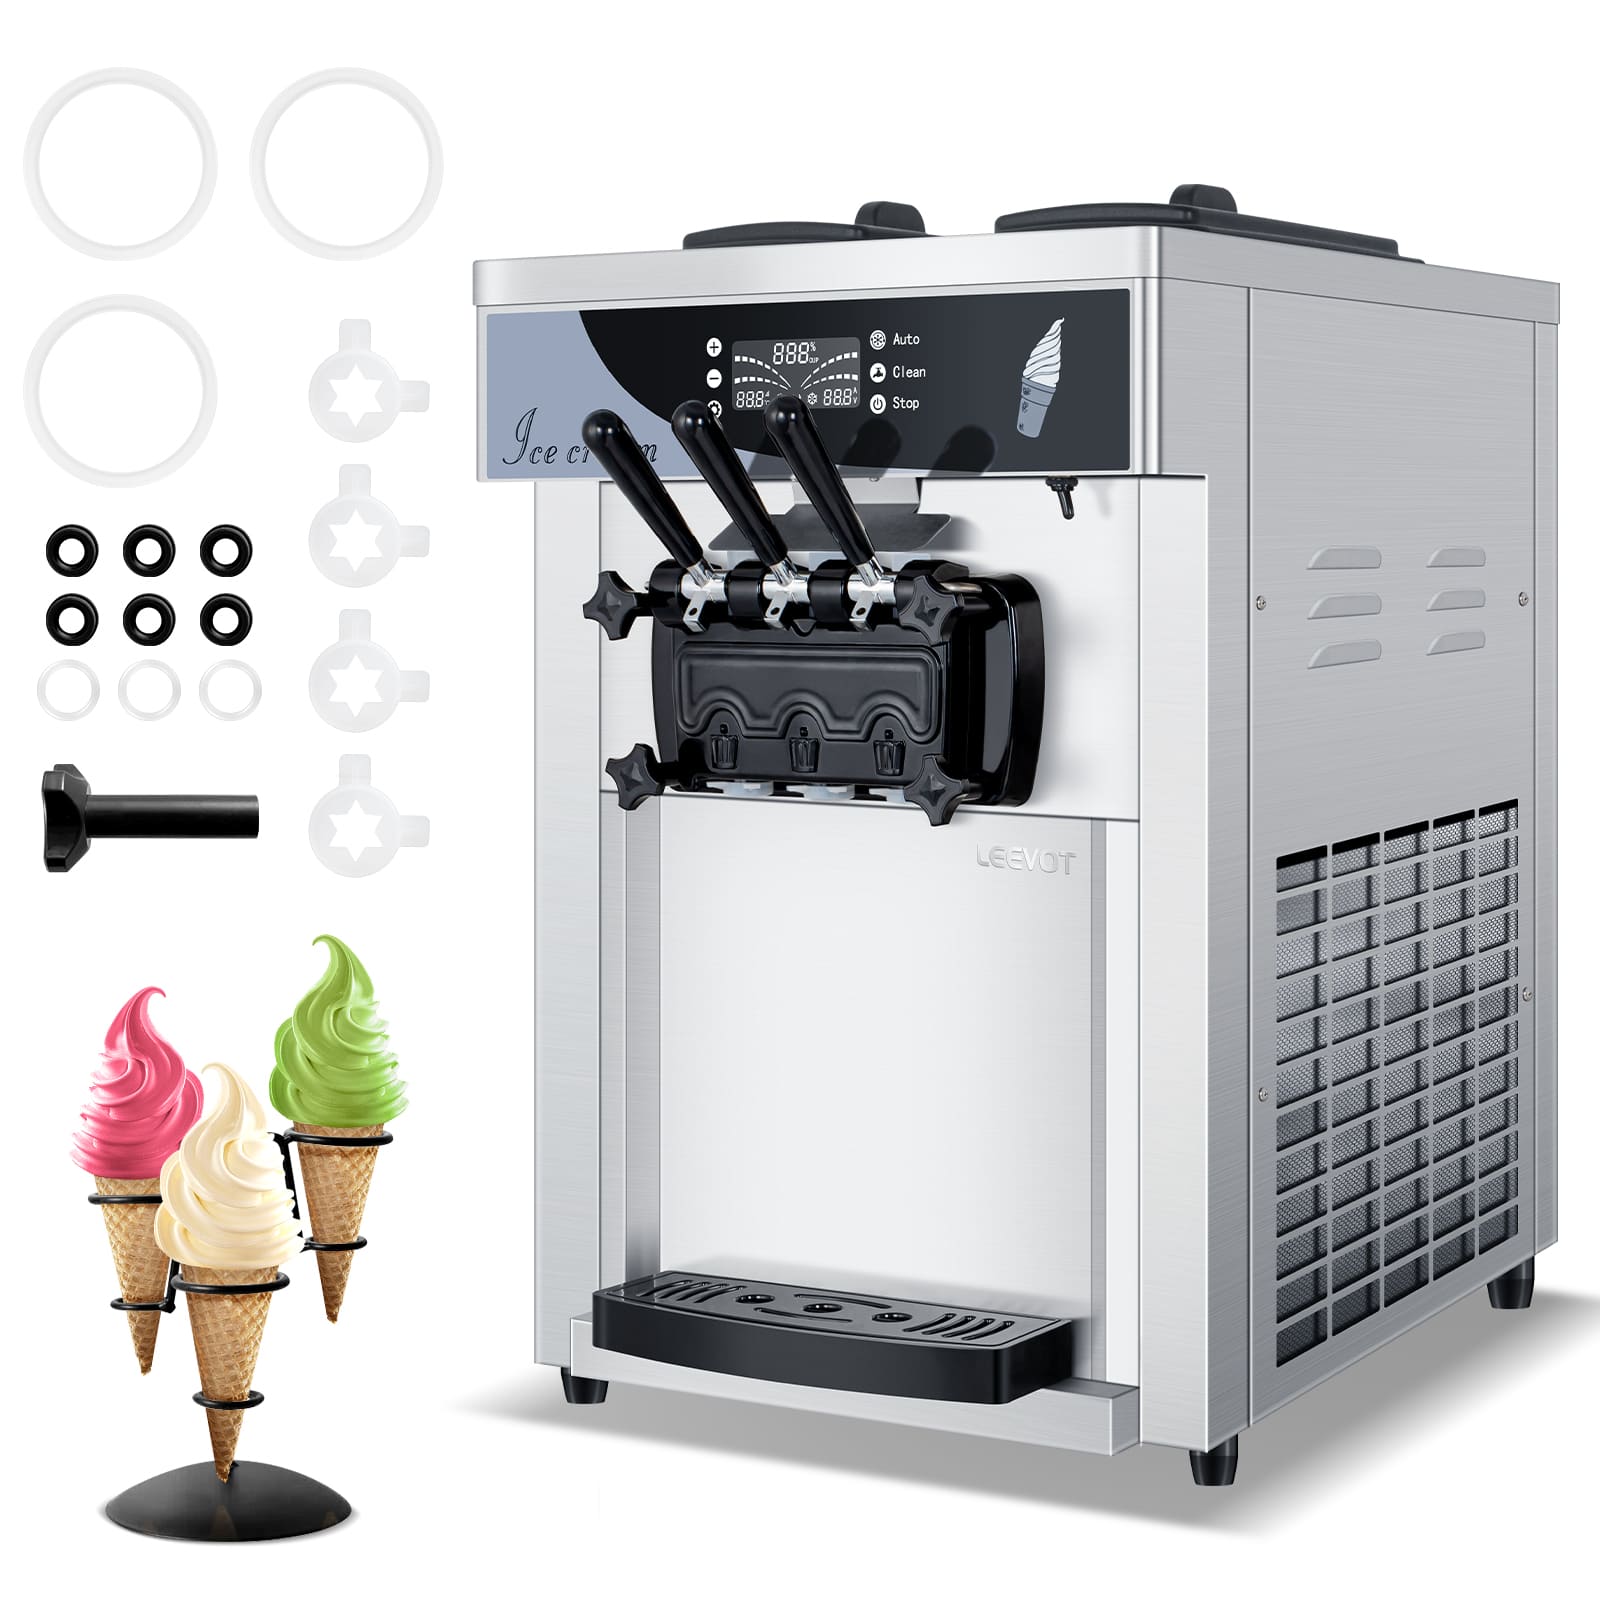 Leevot Commercial Soft Serve Countertop Ice Cream Machine with 2 Hoppers and 3 Dispensers for Restaurants and Snack Bars